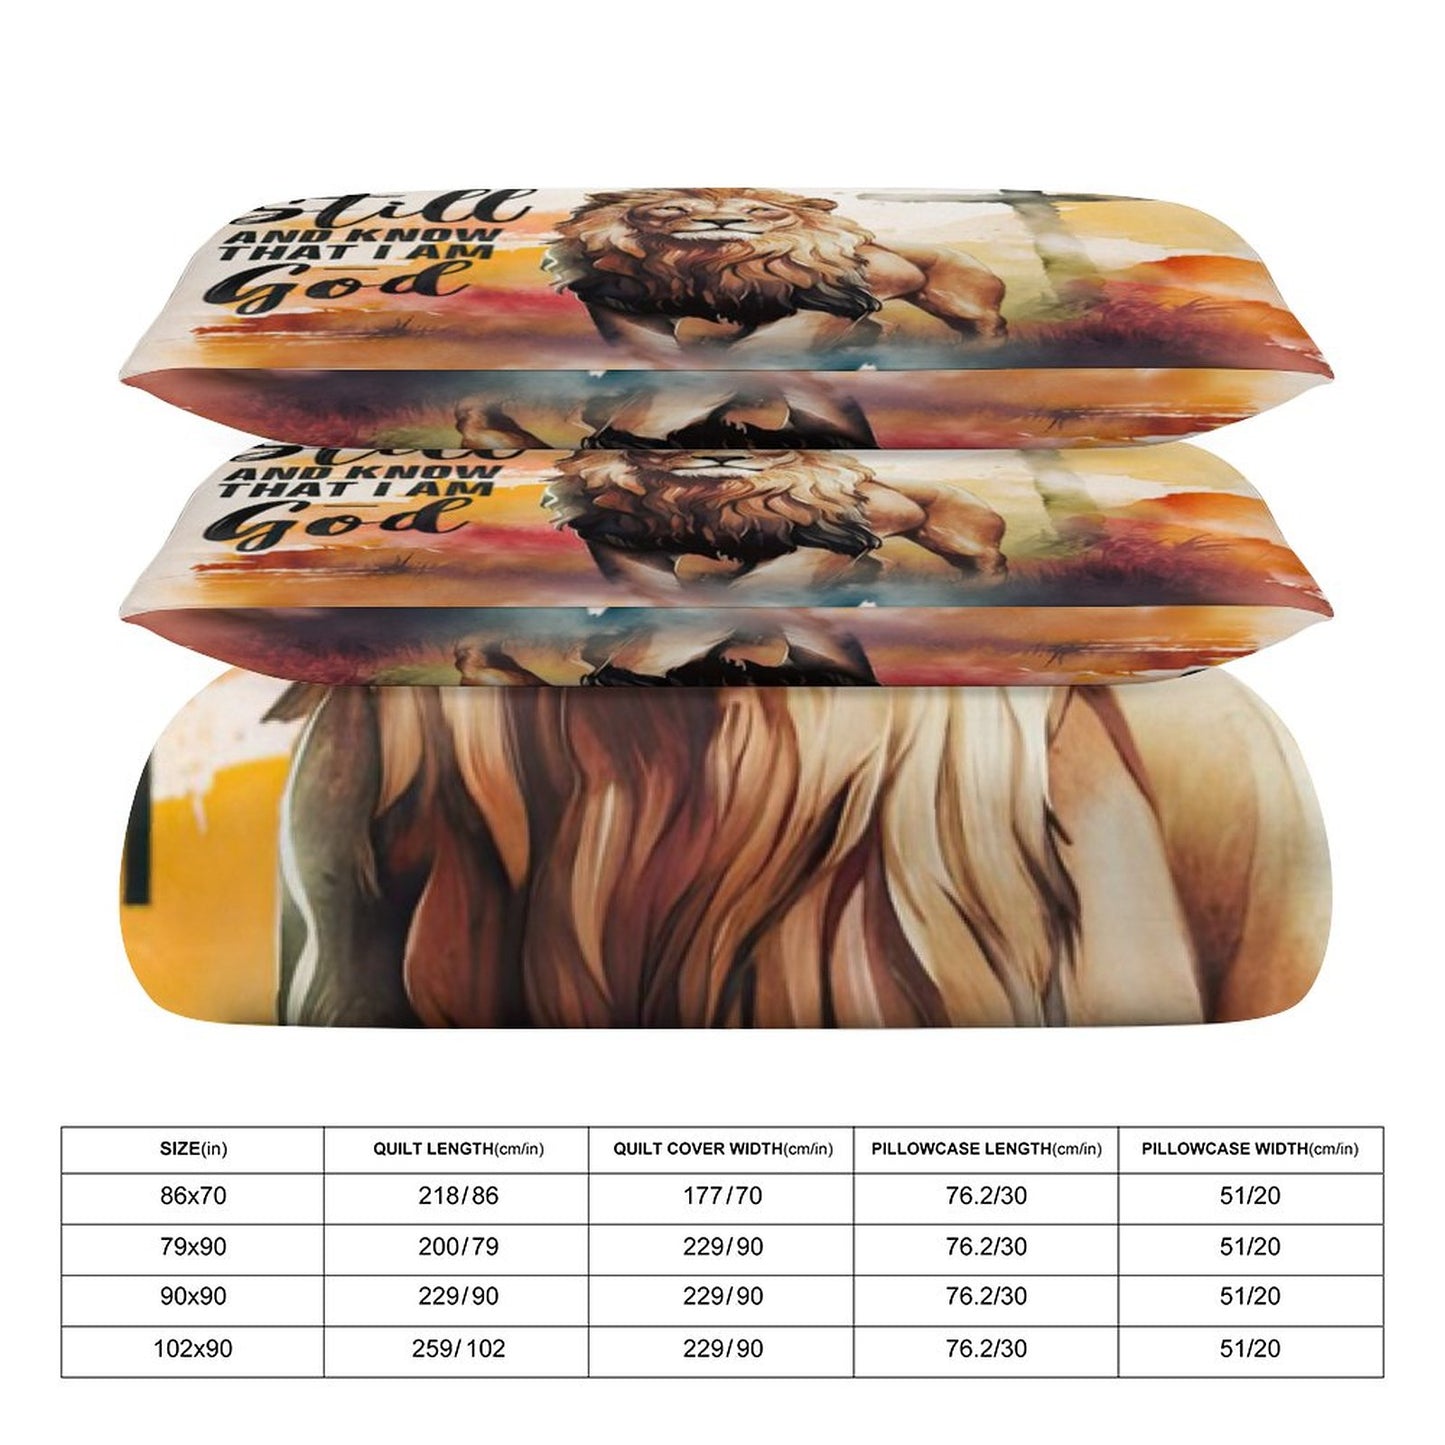 Be Still And Know That I Am God 3-Piece Christian Bedding Set- (Dual-sided Printing)